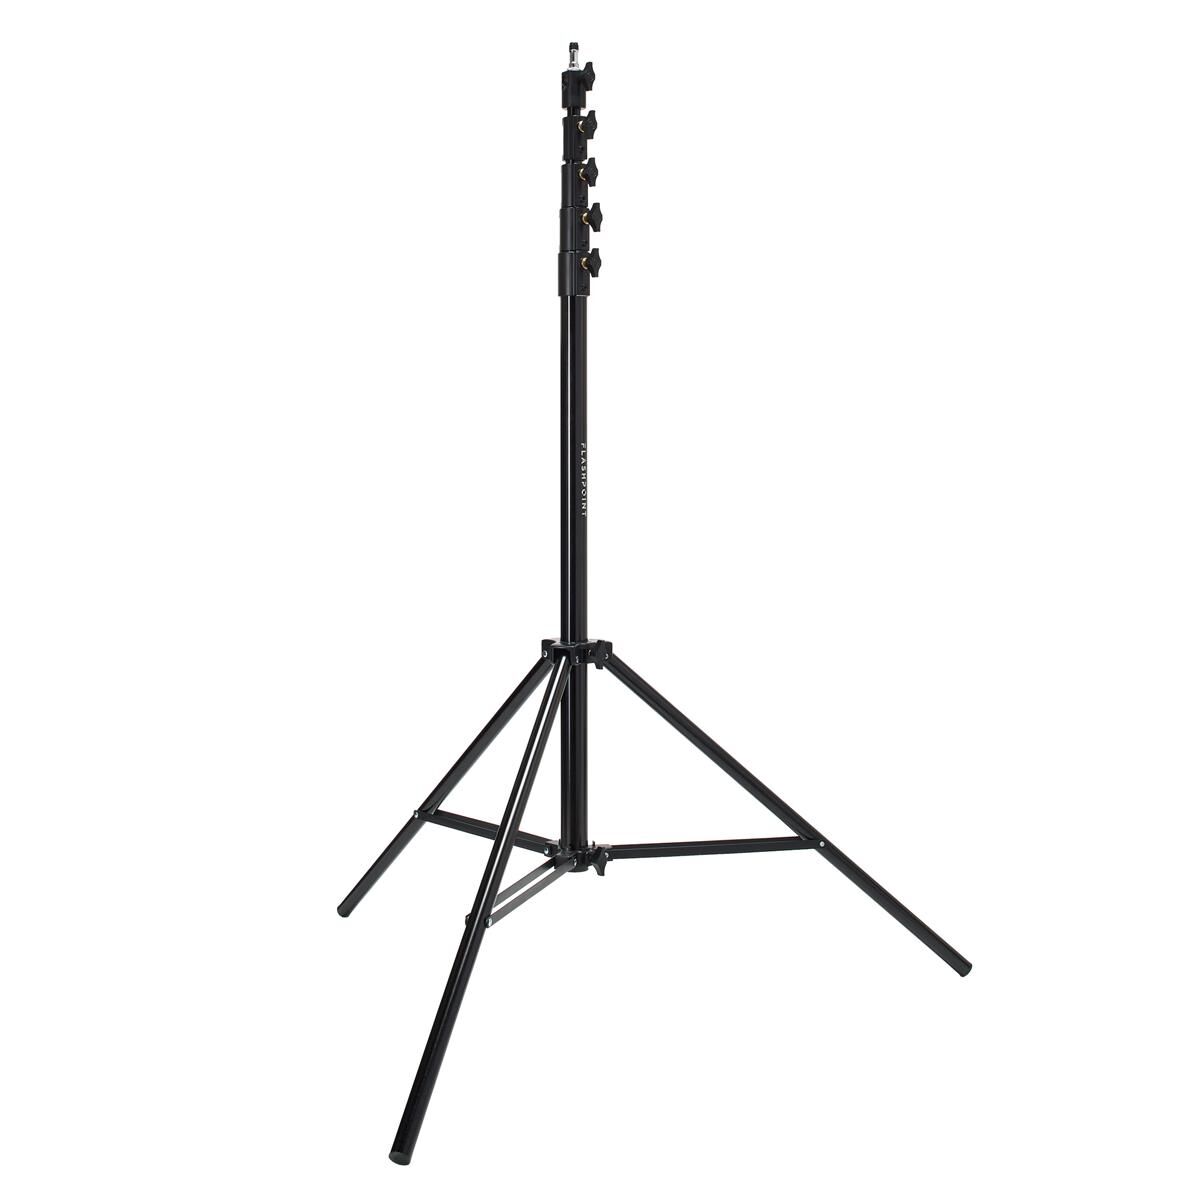 Flashpoint  Pro Air-Cushioned Heavy-Duty Light Stand (Black, 15.7')